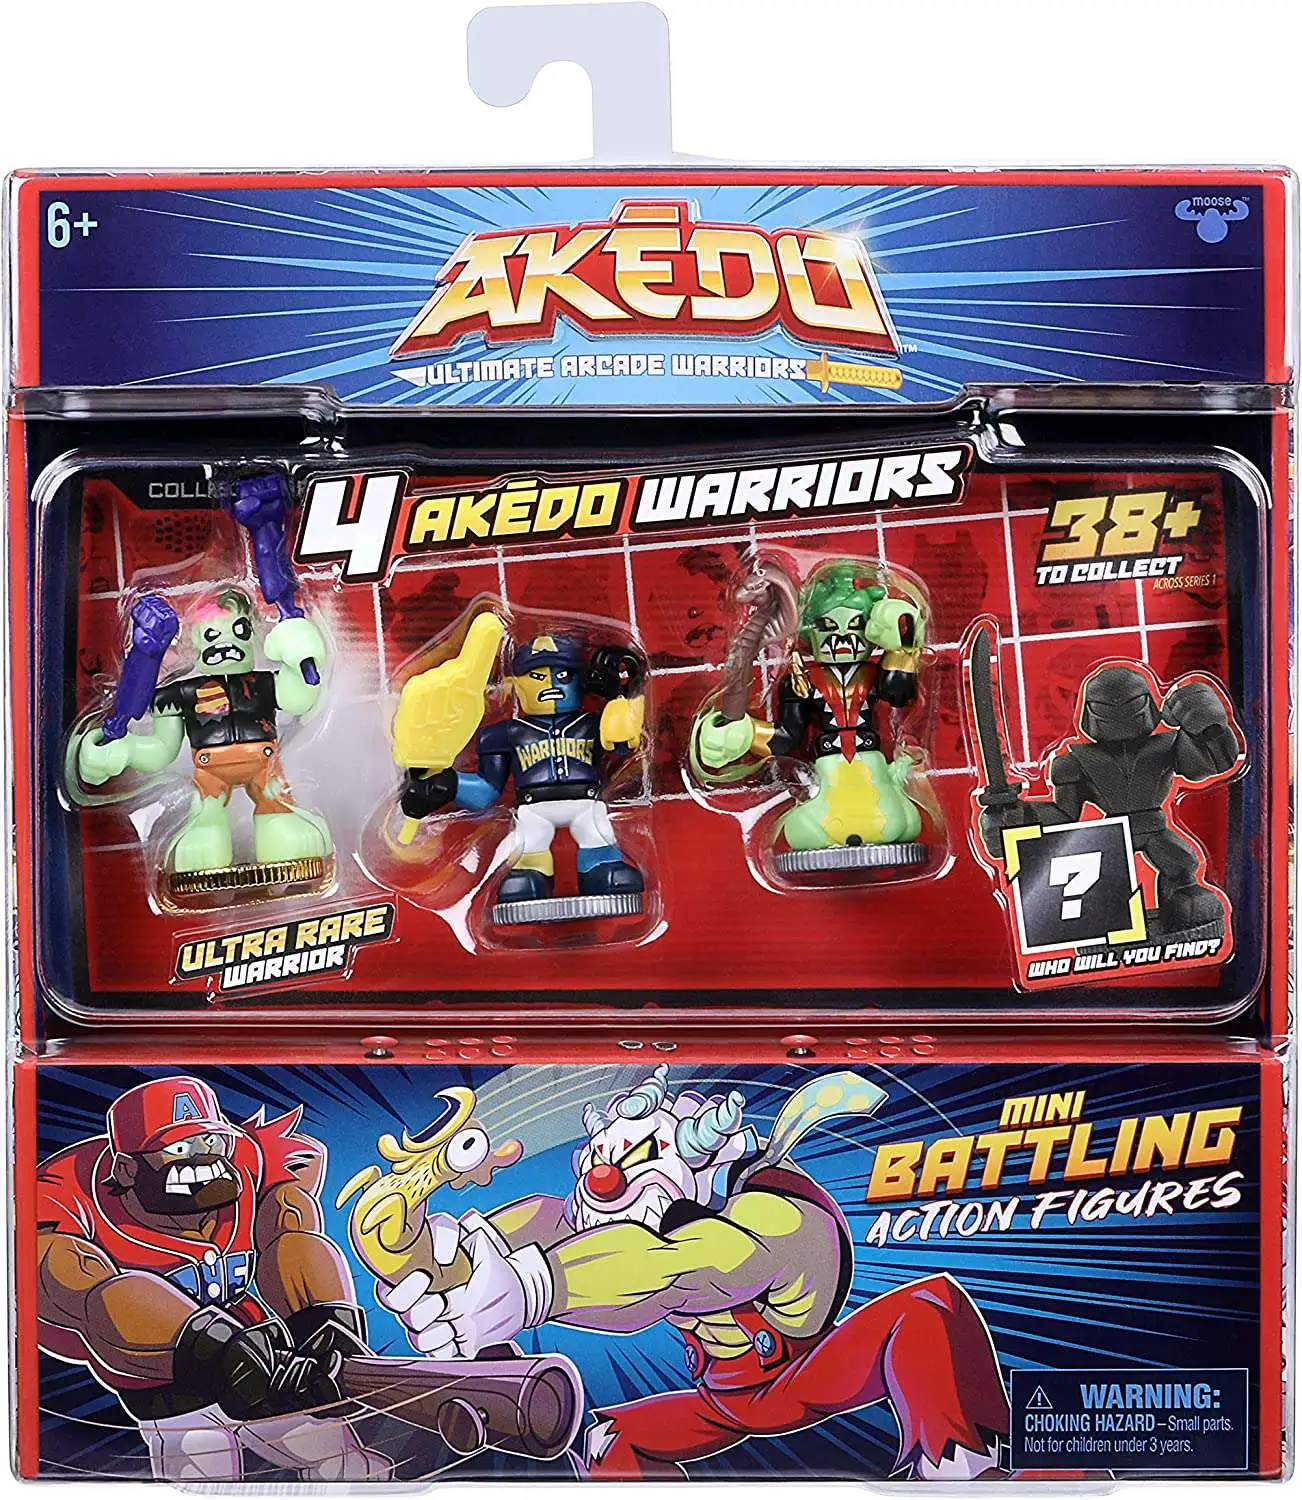 Akedo Ultimate Arcade Warriors Series 1 Strikeout, Miss Slither, Deadbreath & MYSTERY Character Mini Battling Action Figure FIGHT 4-Pack